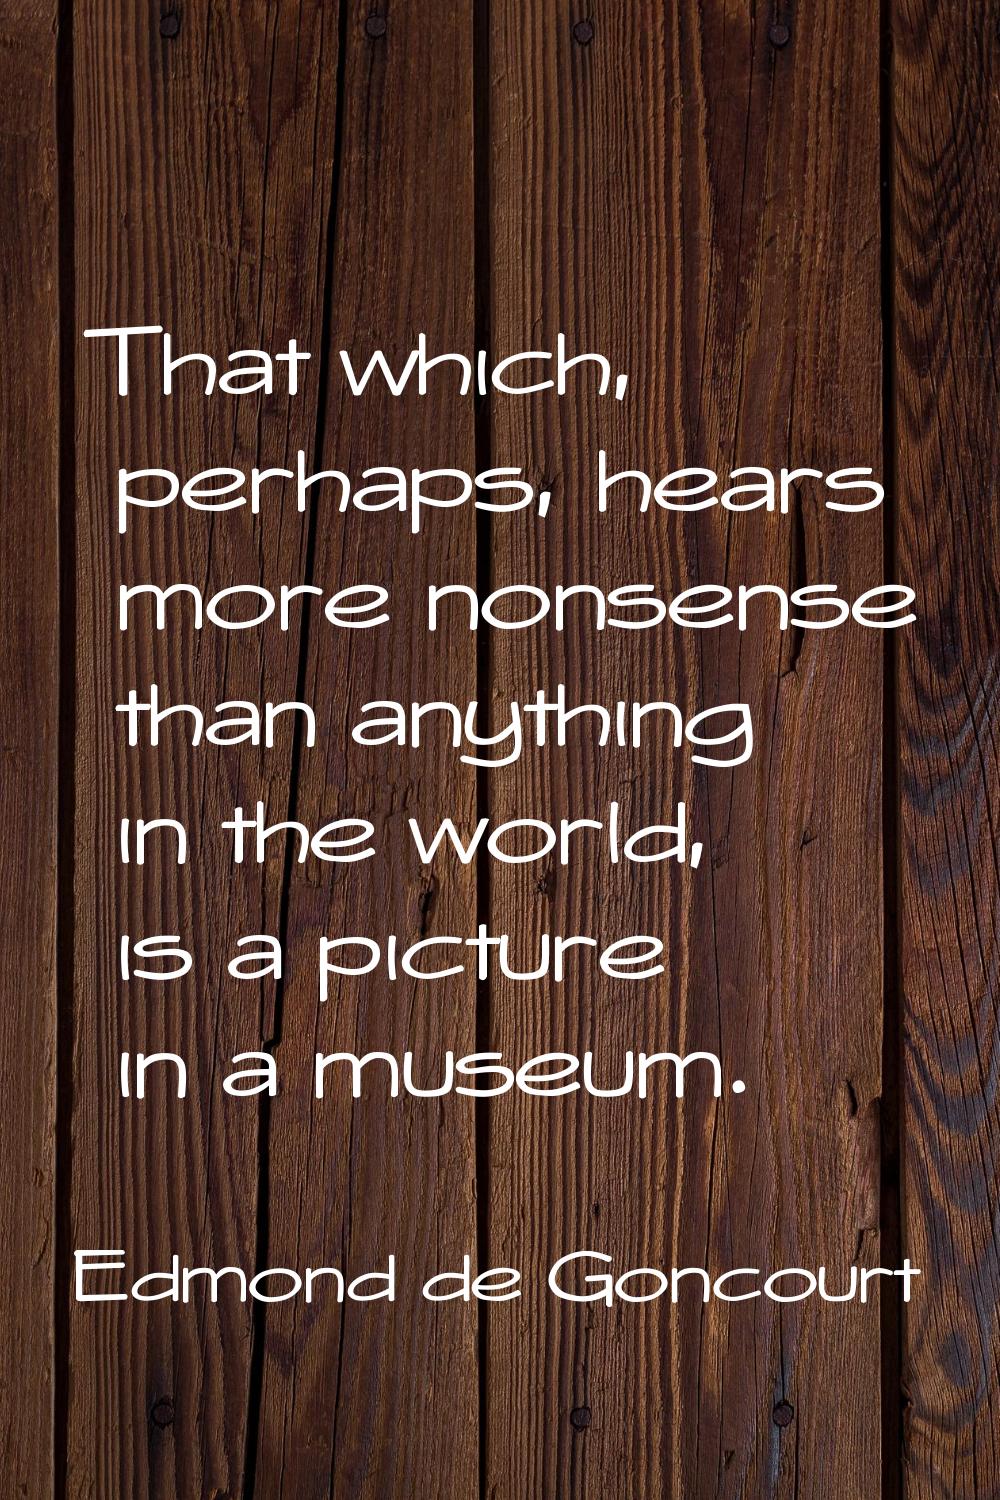 That which, perhaps, hears more nonsense than anything in the world, is a picture in a museum.